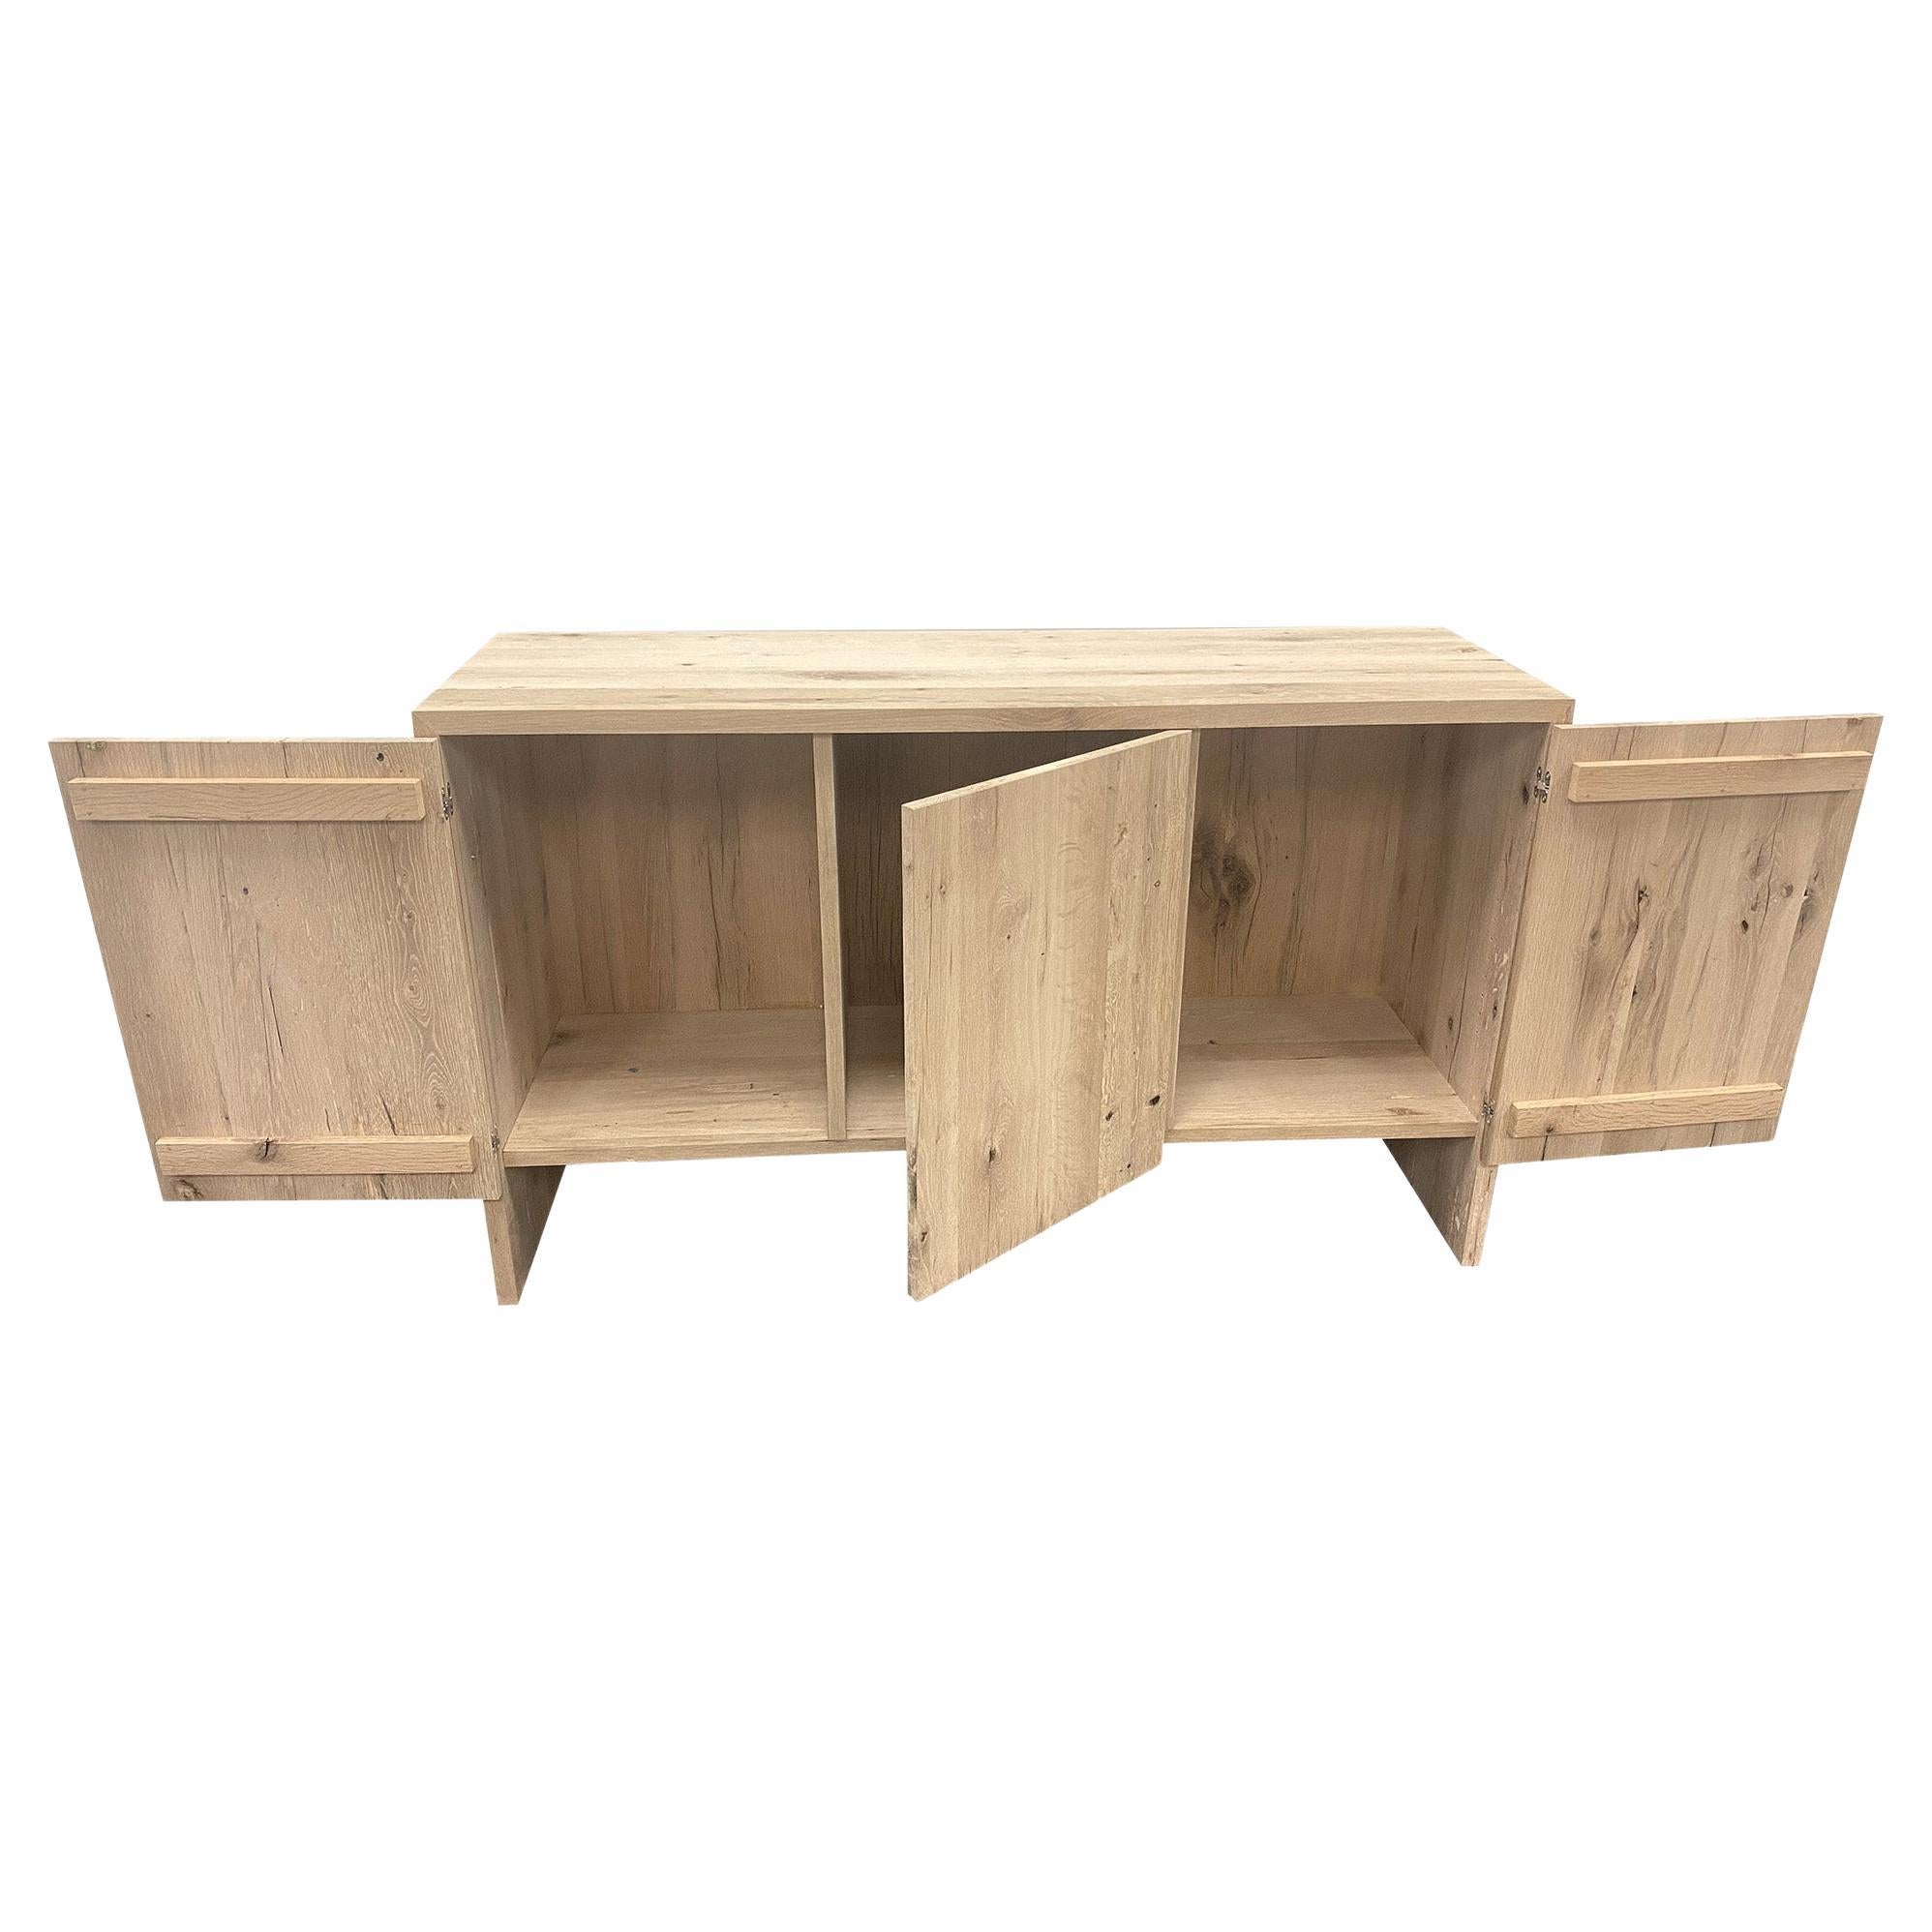 Modern Solid White Oak Handmade Console Table by Fortunata Design For Sale